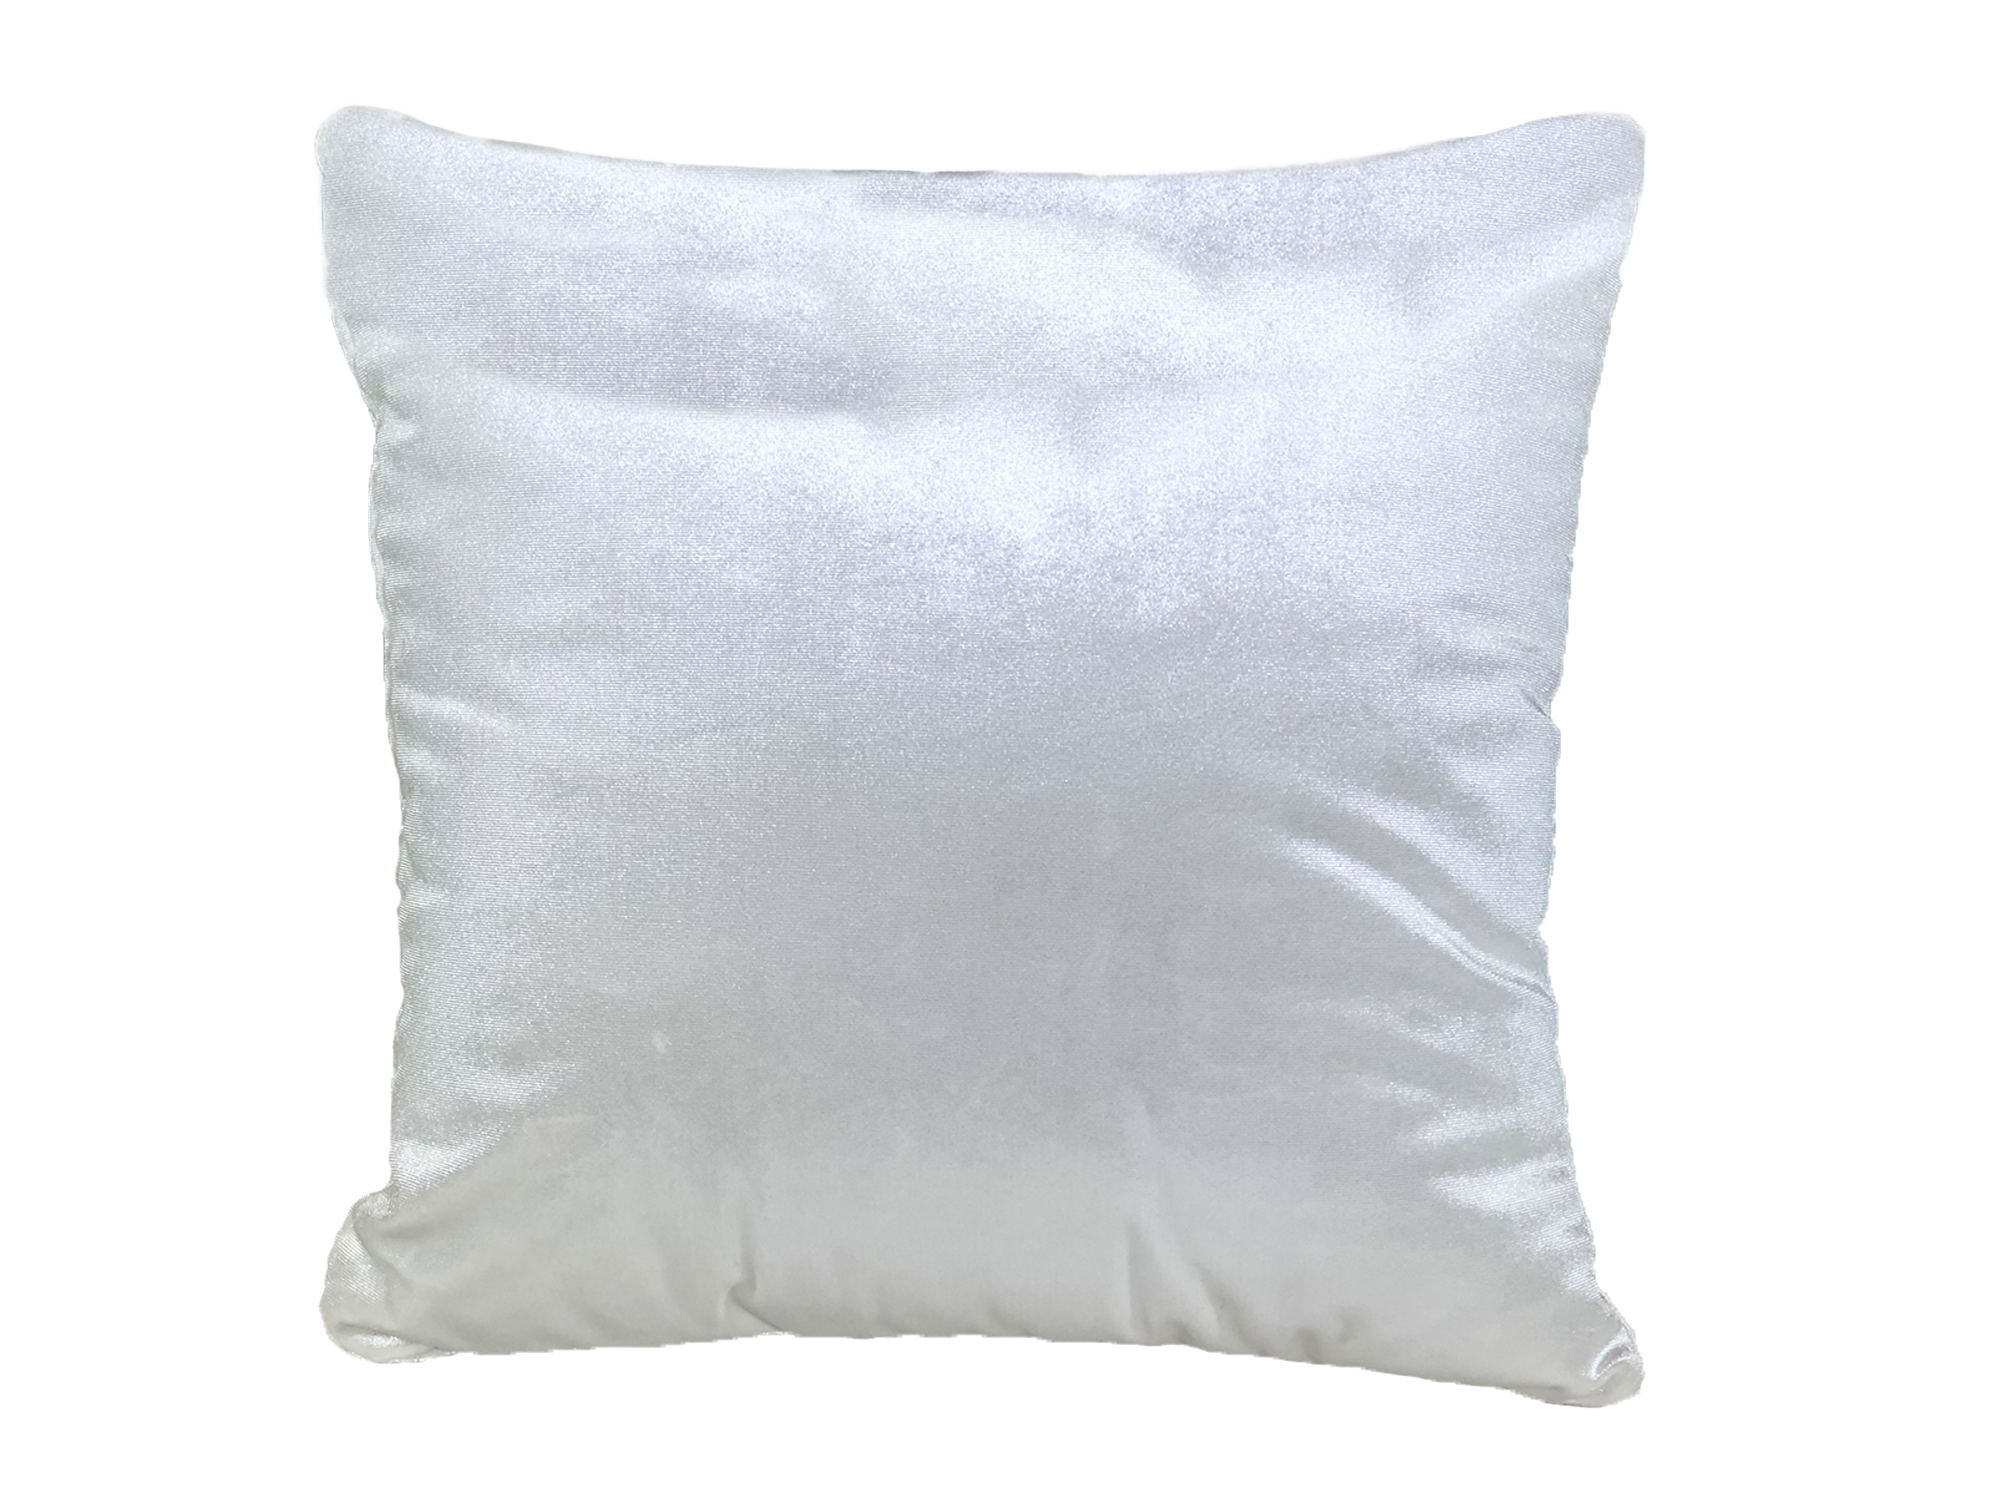 MICROSUEDE PILLOW - IVORY